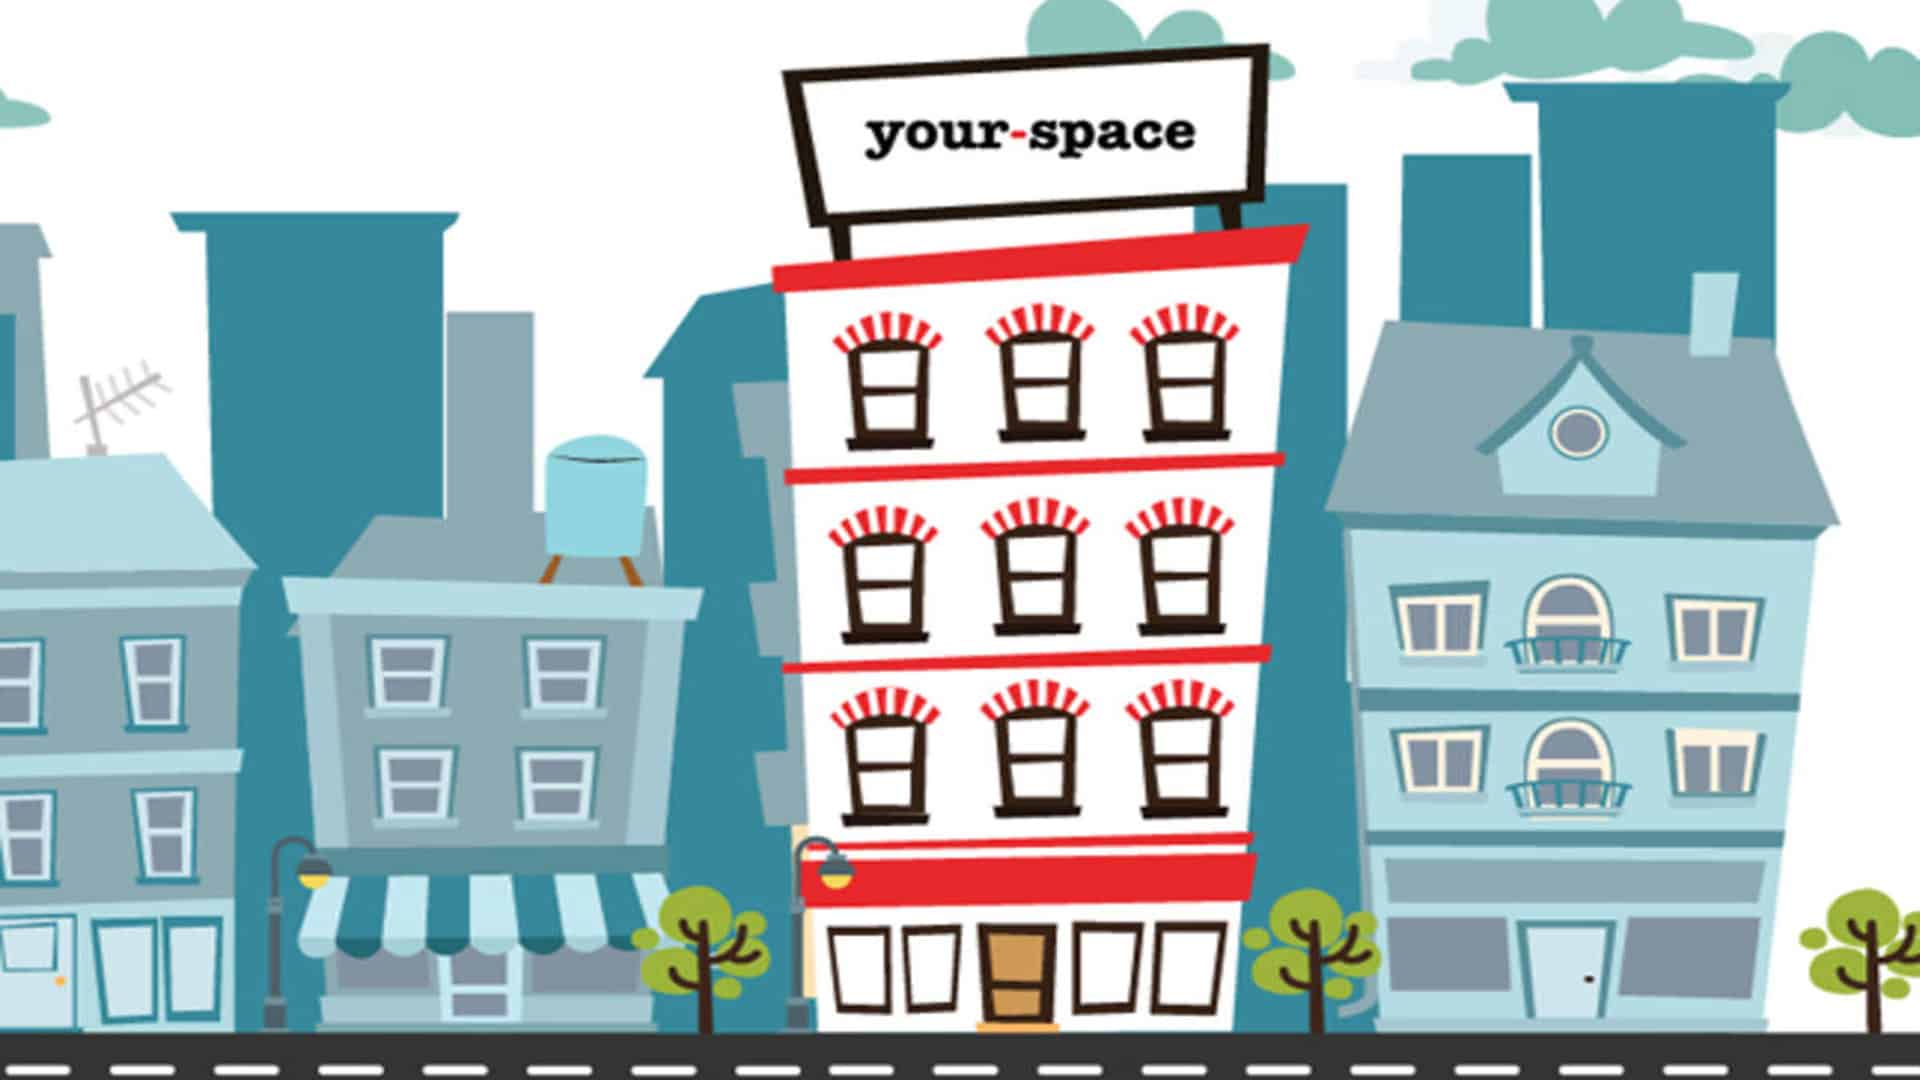 Startup Your-Space raises USD 10 mn to grow student housing biz